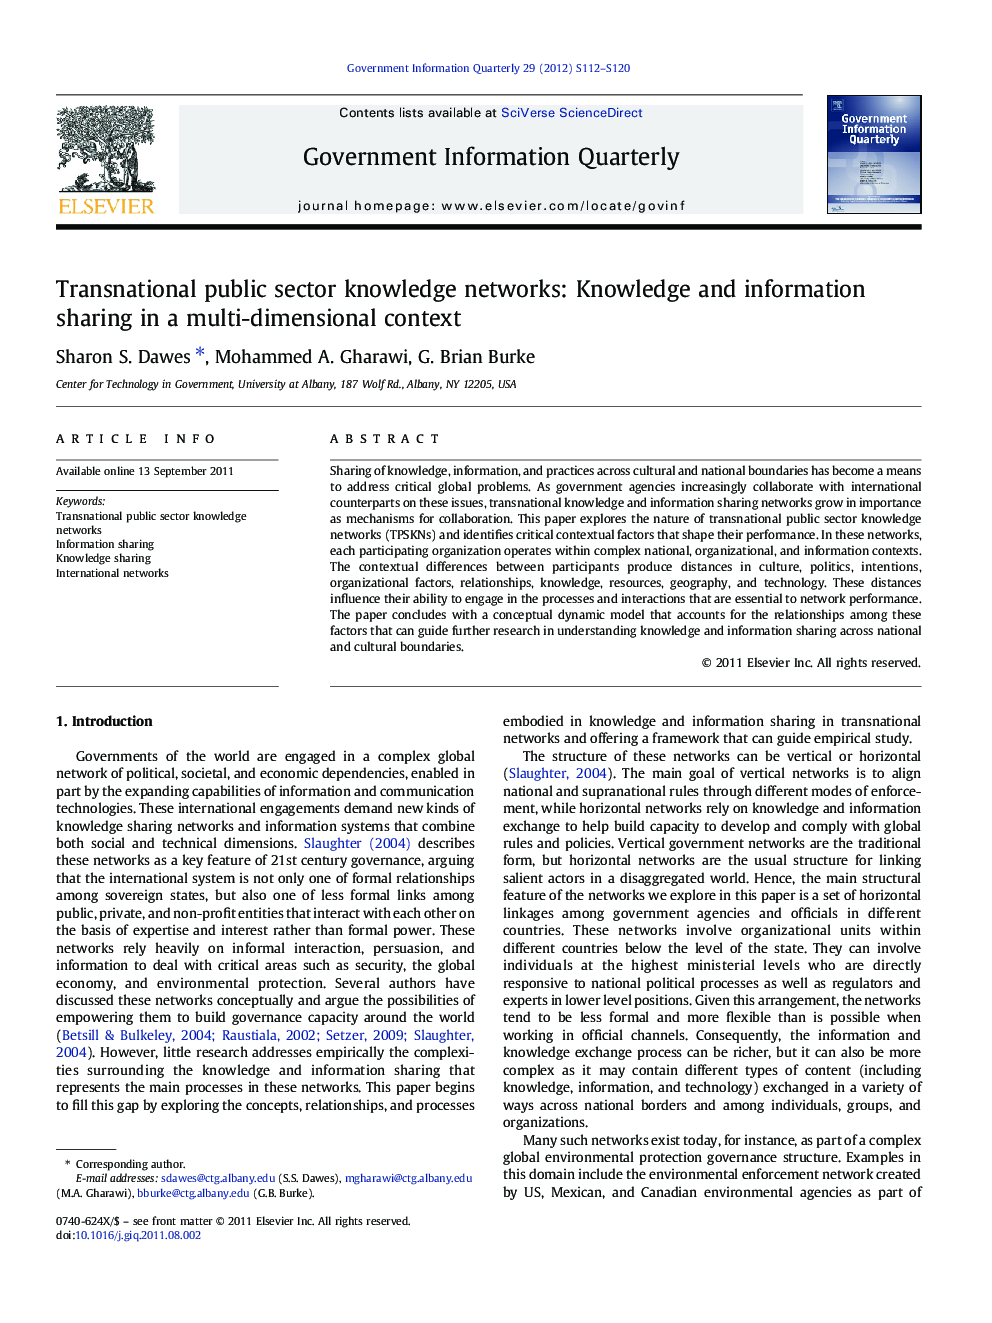 Transnational public sector knowledge networks: Knowledge and information sharing in a multi-dimensional context